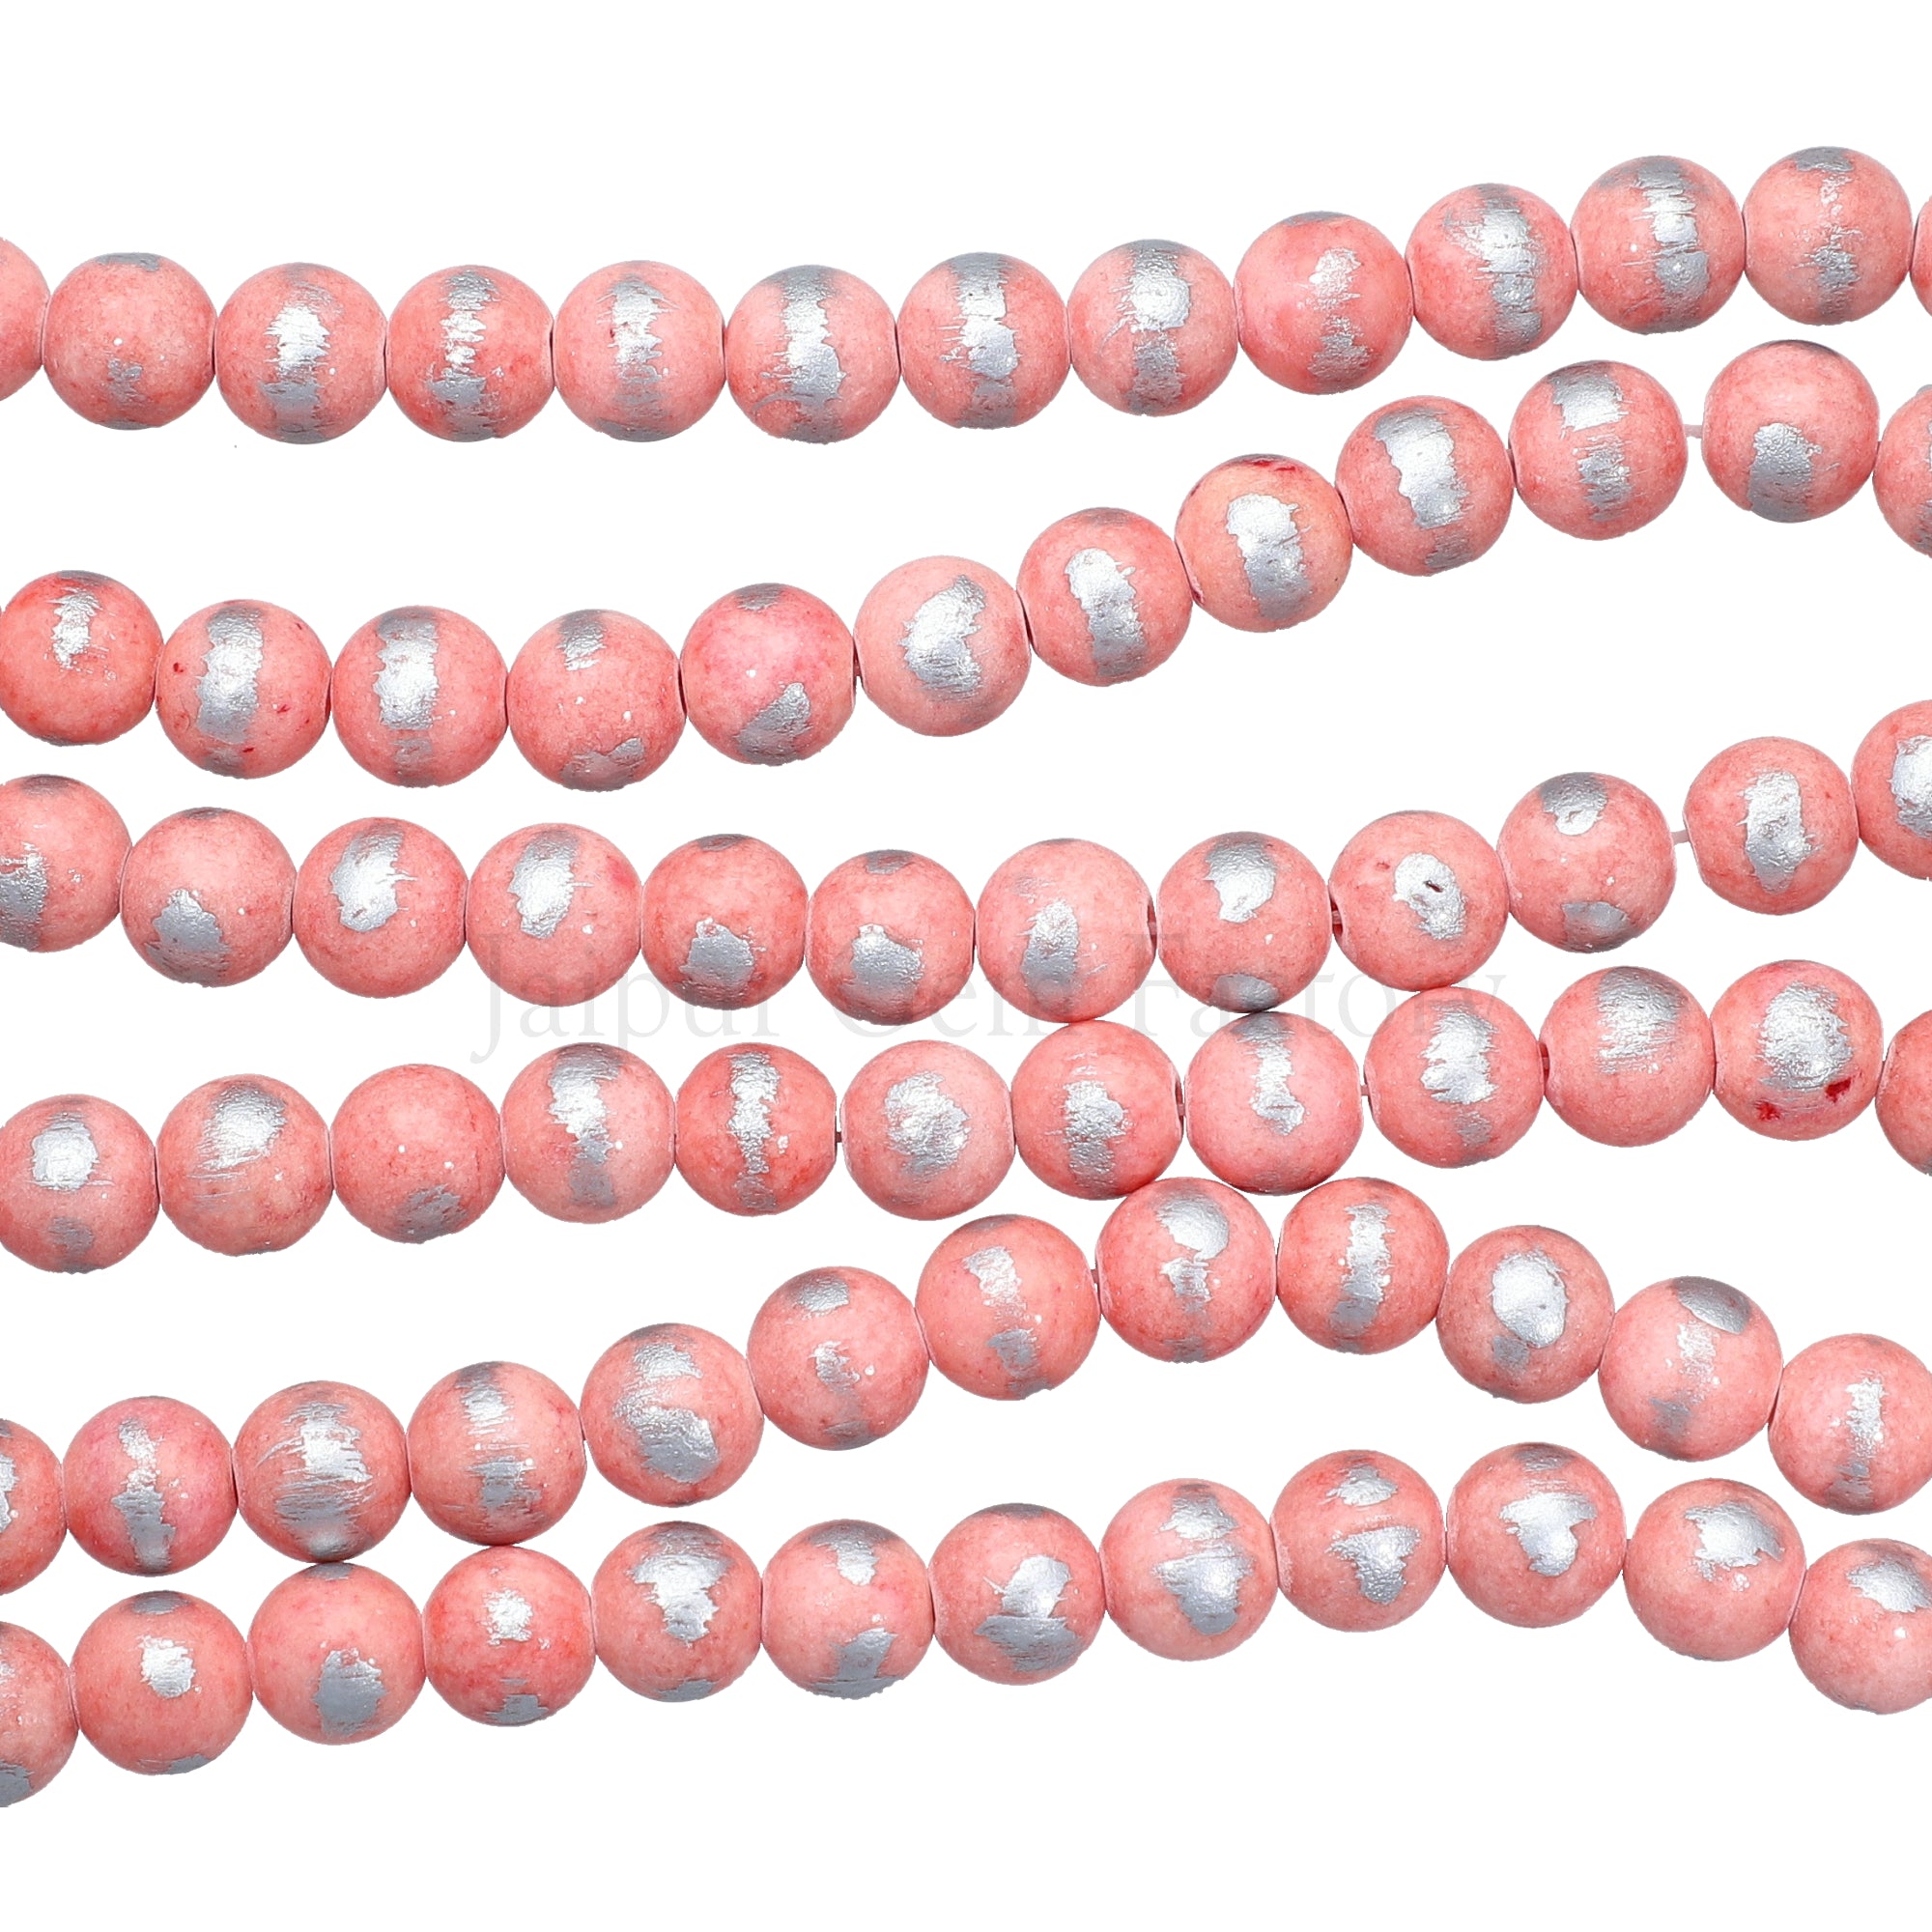 8 MM Salmon Pink With Silver Foil Jade Smooth Round Beads 15 Inches Strand